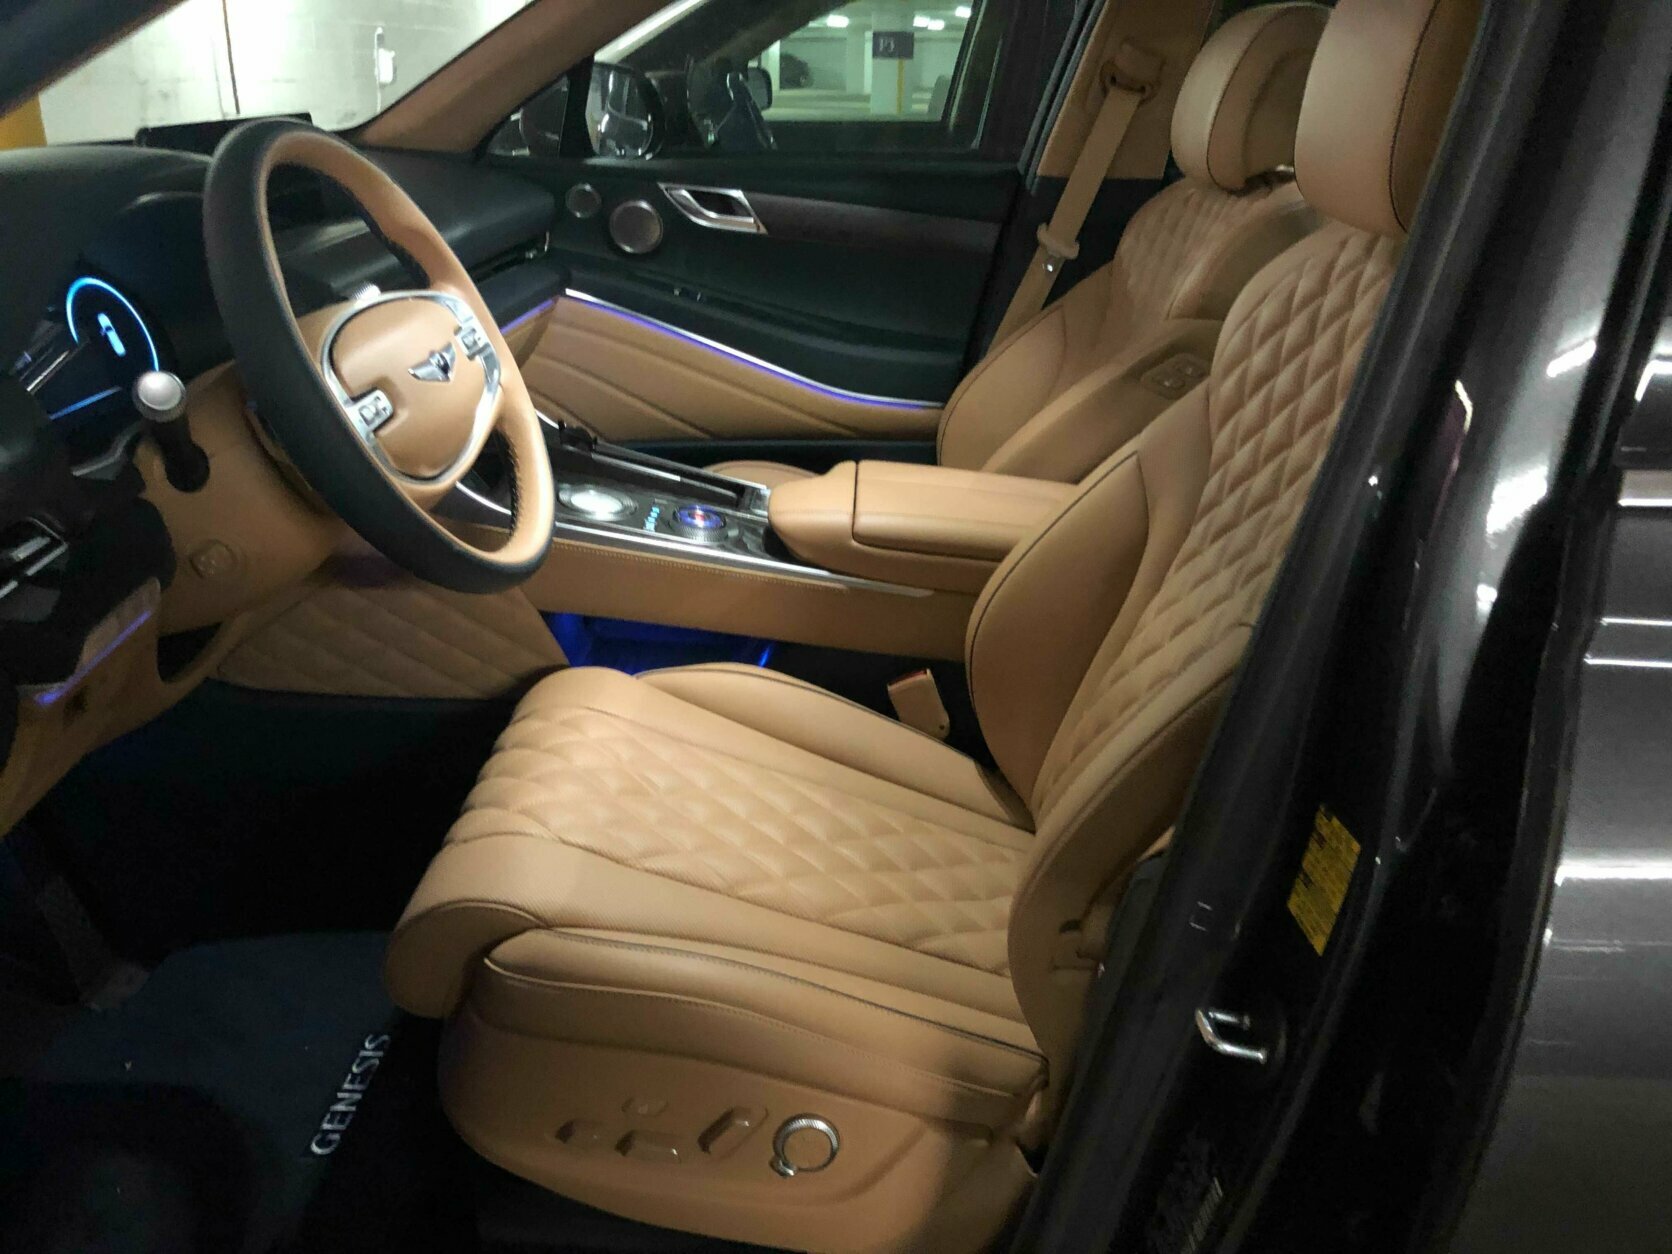 <p>Past Genesis models came with nicely appointed interiors for the price tag. Now for 2021, the new GV80 has really upped the game. Upgraded materials highlight the upscale new look of Genesis vehicles. The real wood trim is a nice touch.</p>
<p>Quilted Nappa leather seats are ventilated and heated and are dream seats offering every comfort. Only the driver’s seat has massage.</p>
